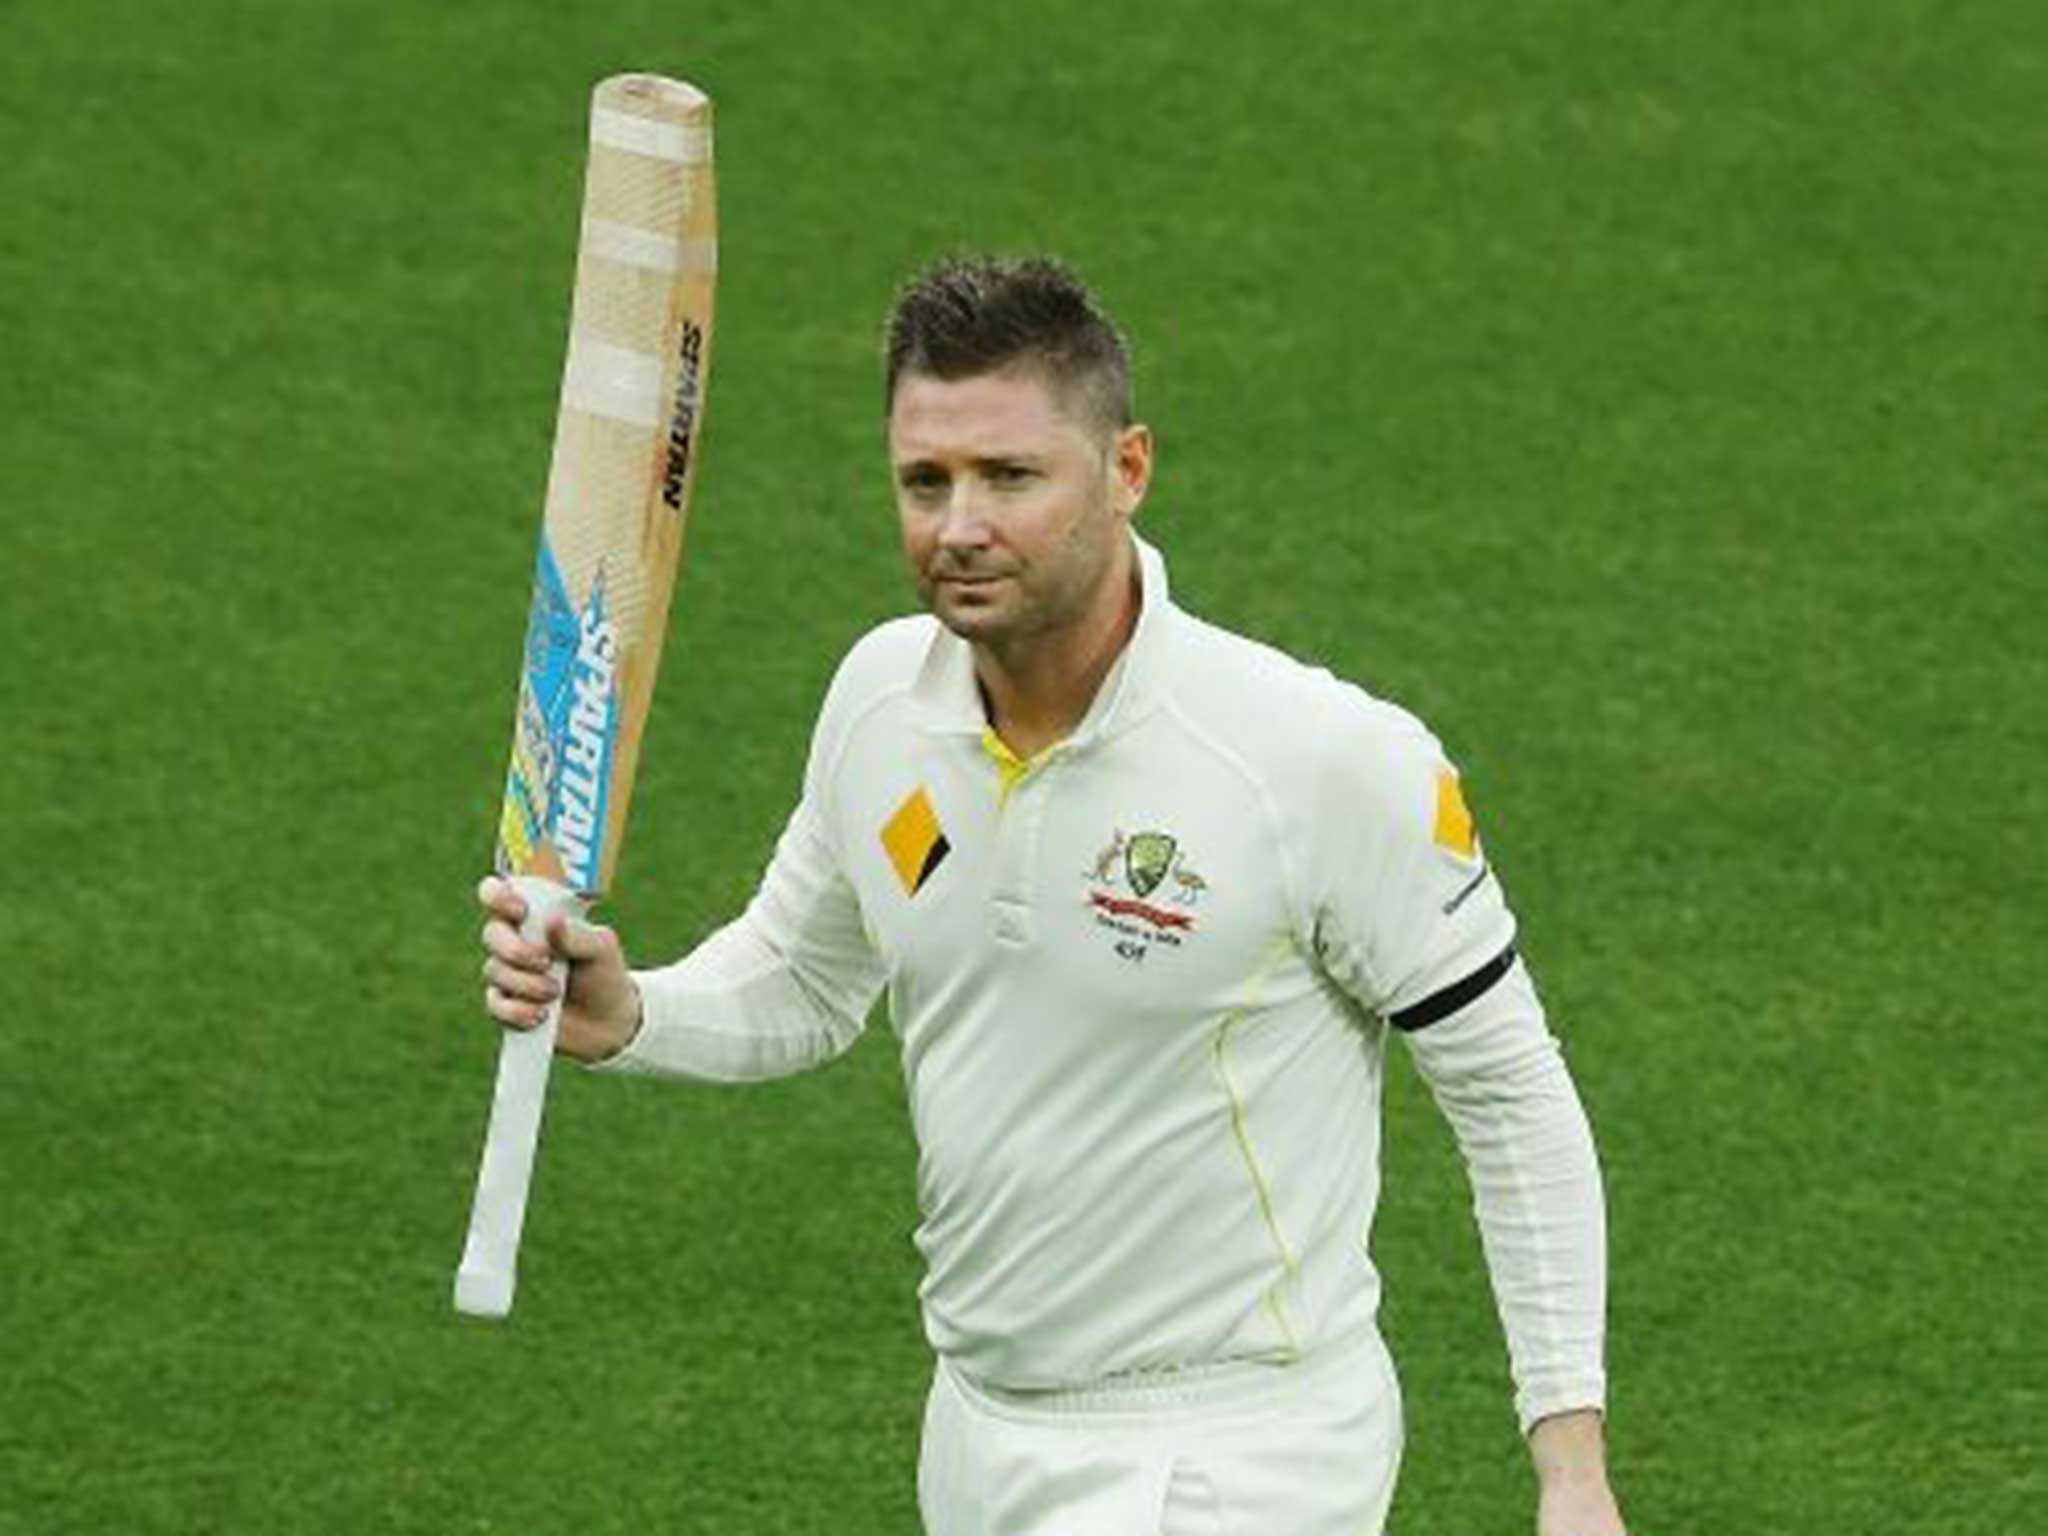 Michael Clarke believes his fitness to field is the key element in his recovery from hamstring surgery